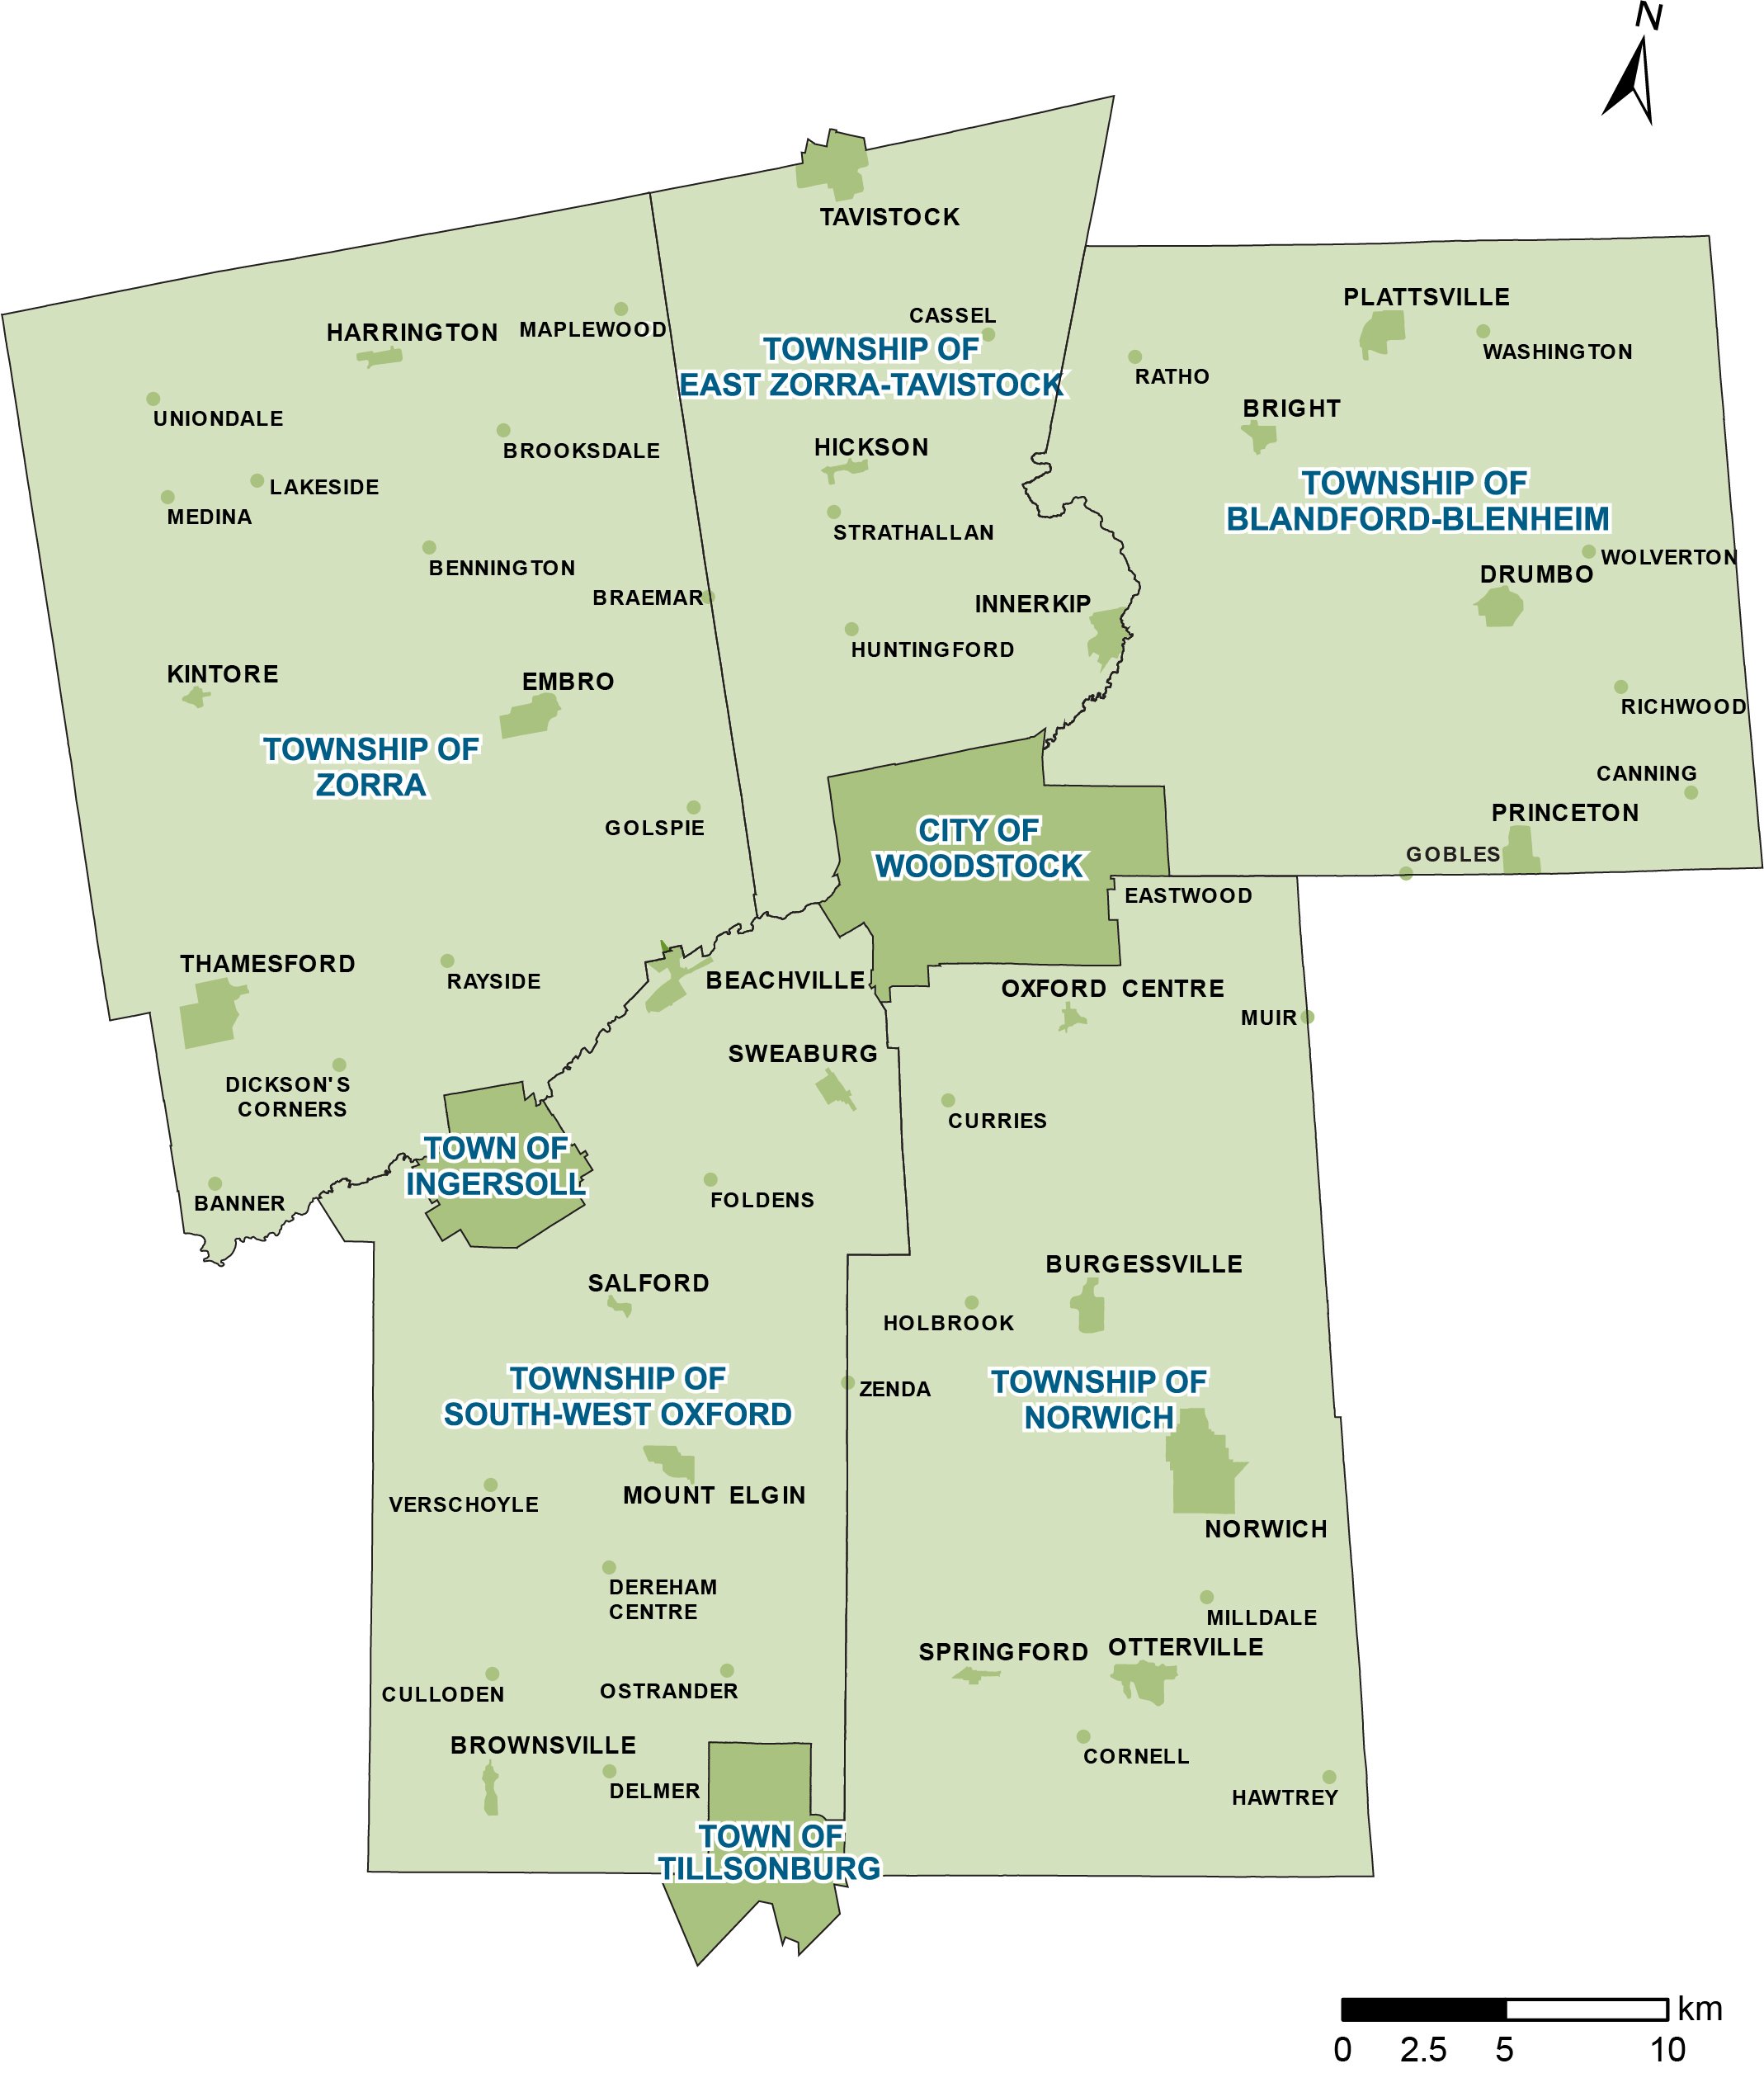 Map of County and Municipalities